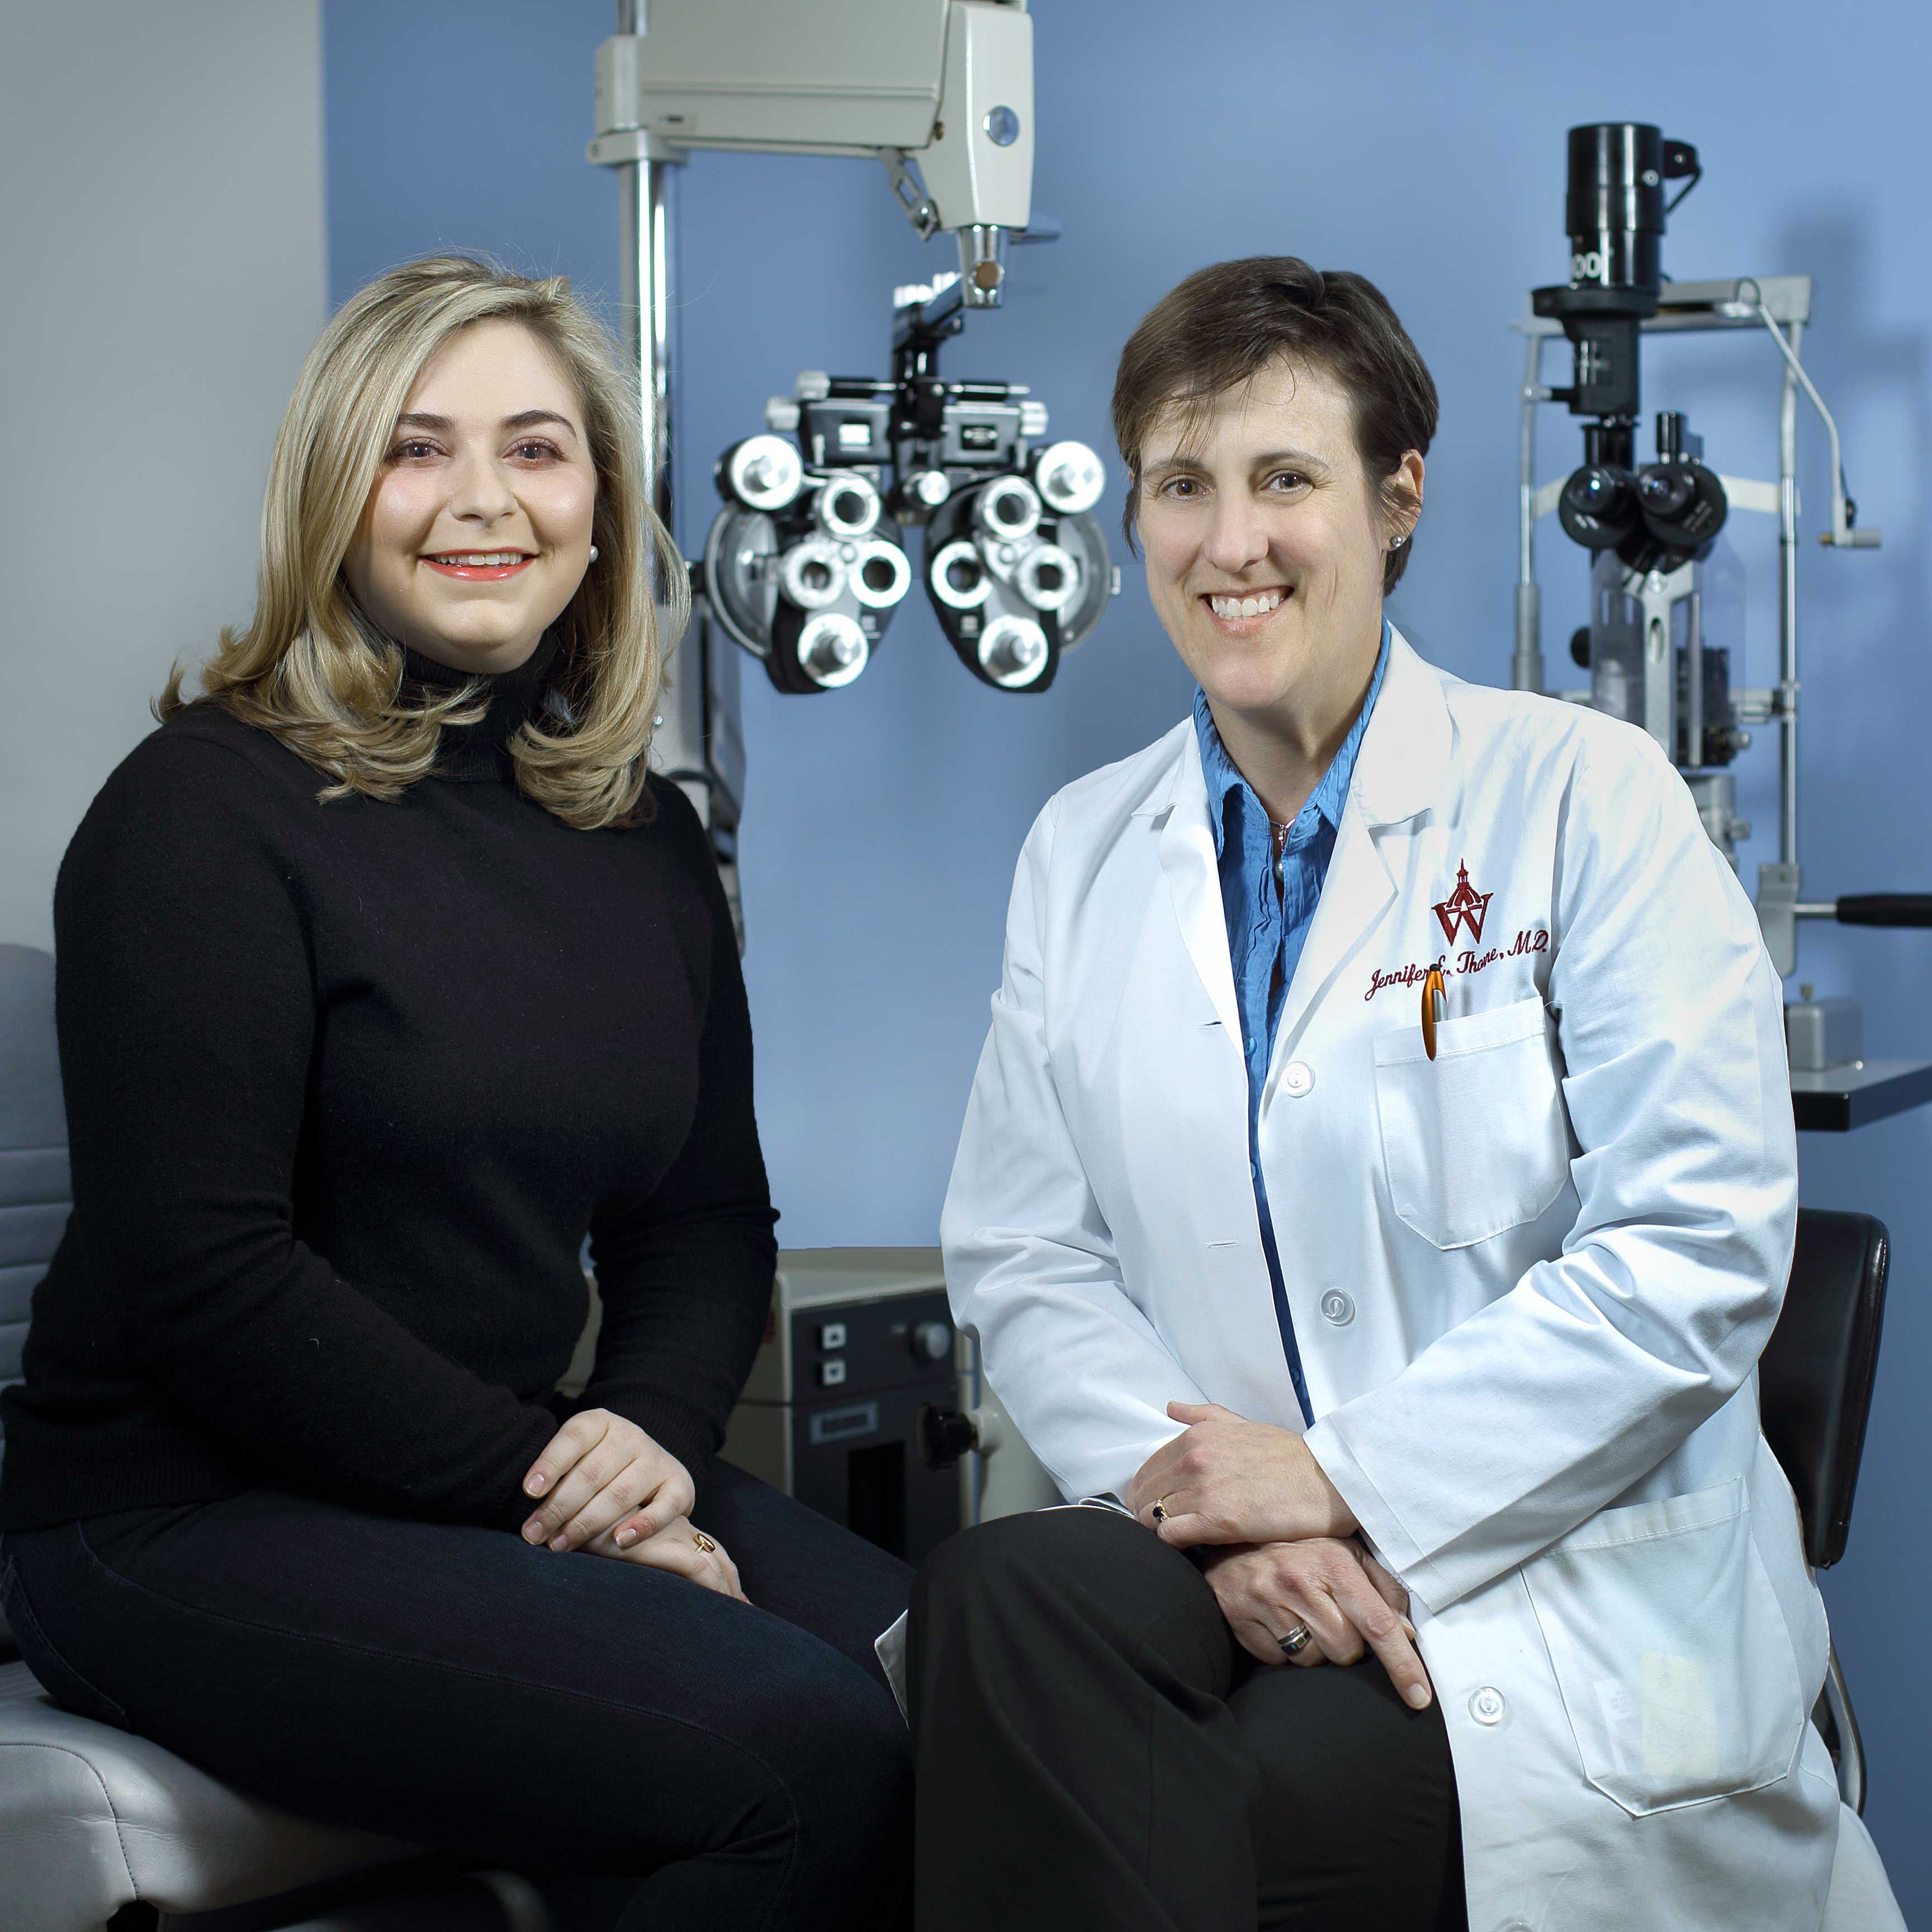 Sarah Hill and Dr. Jennifer Thorne in the ophthalmology office